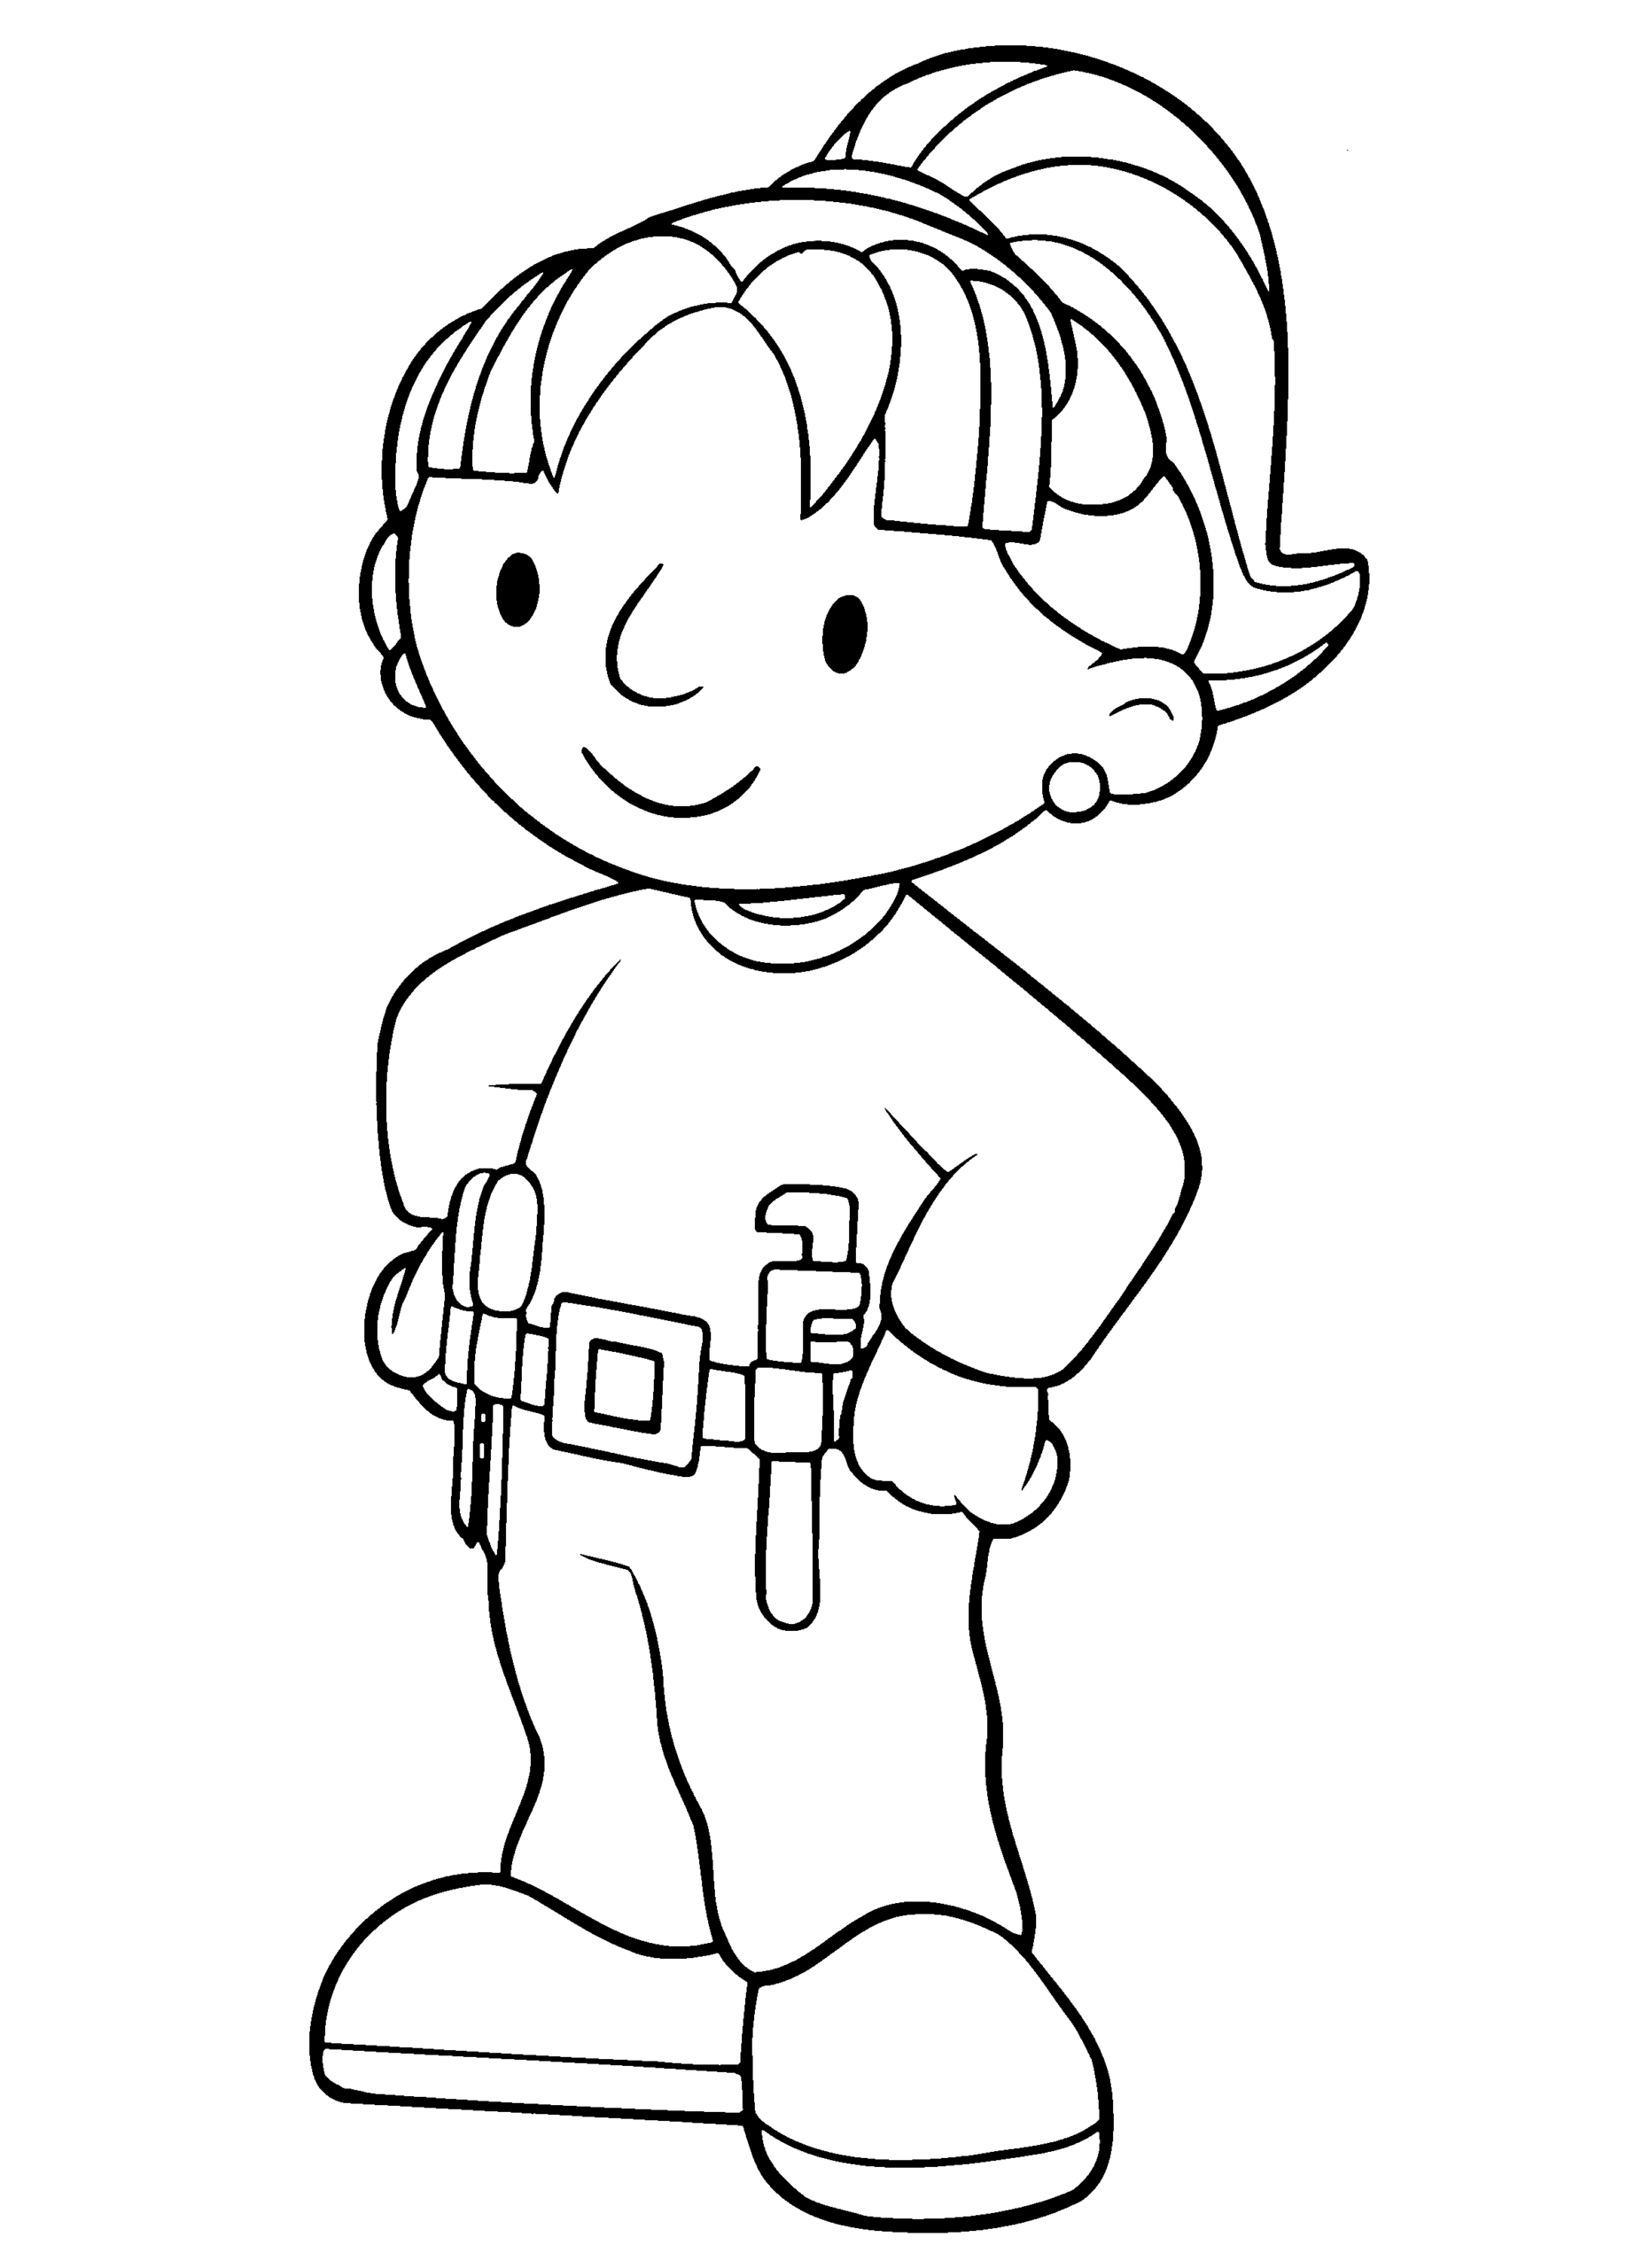 Bob the Builder Coloring Pages TV Film bob the builder 61 Printable 2020 01083 Coloring4free